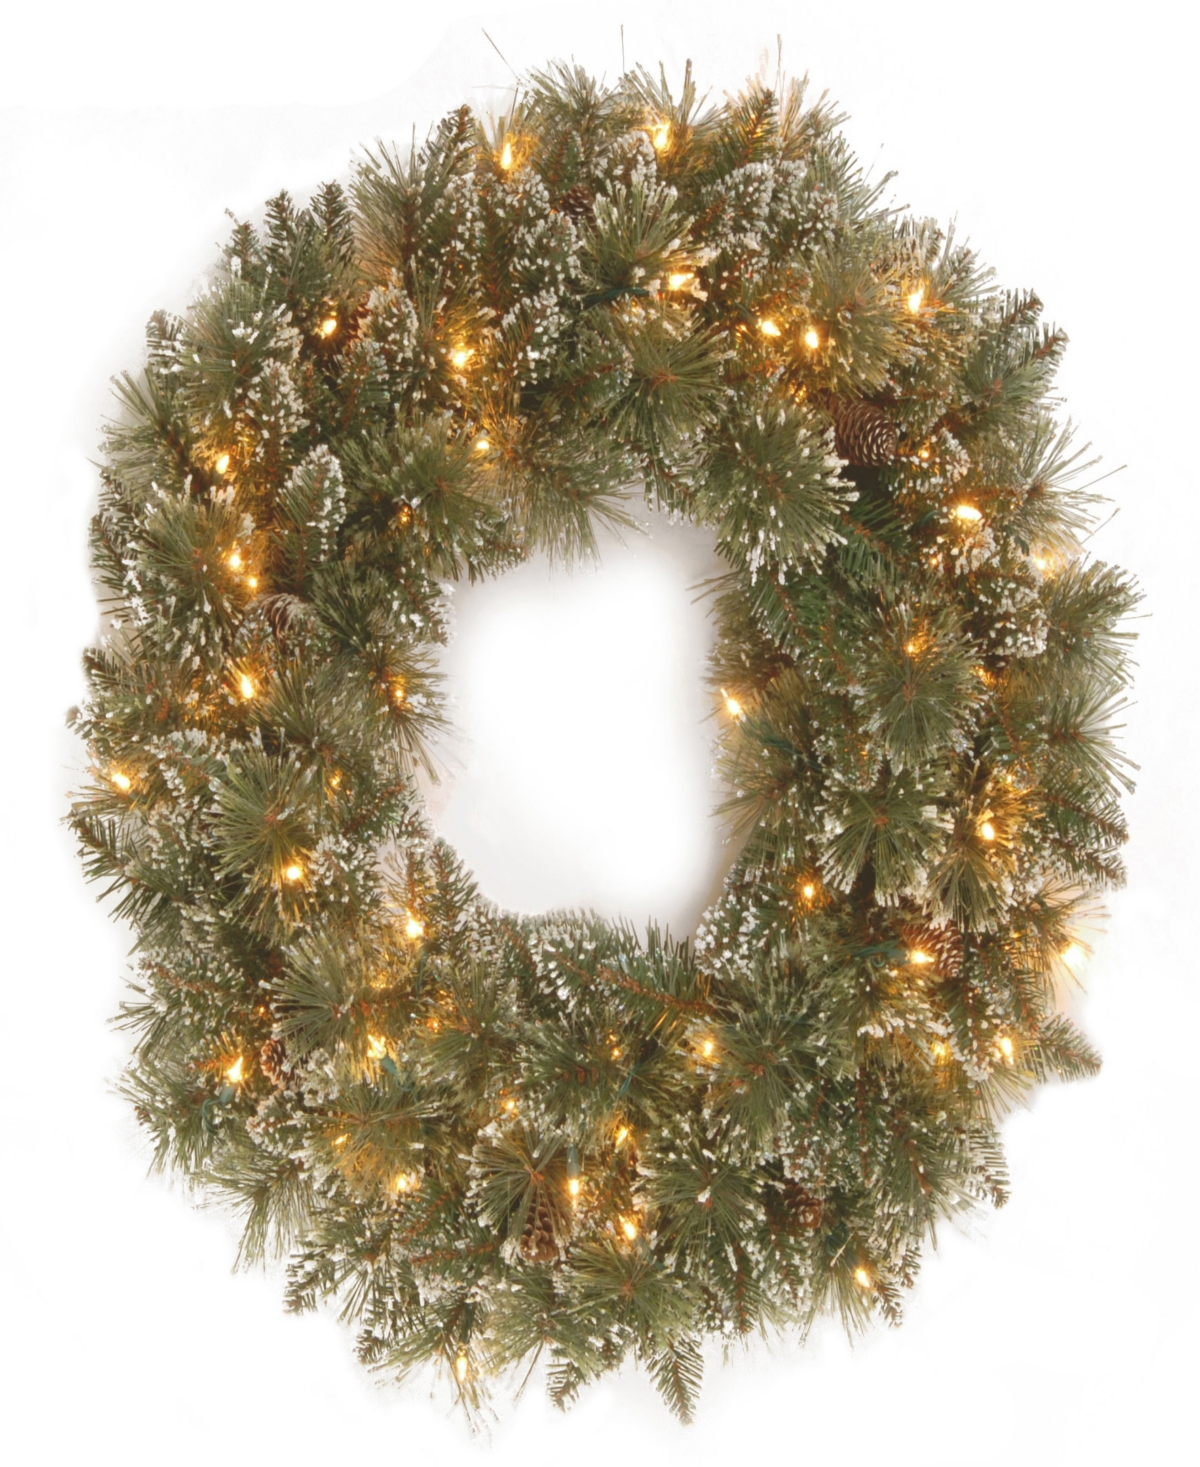 National Tree Company 30" Glittery Bristle Pine Wreath With Twinkly Led Lights In Green